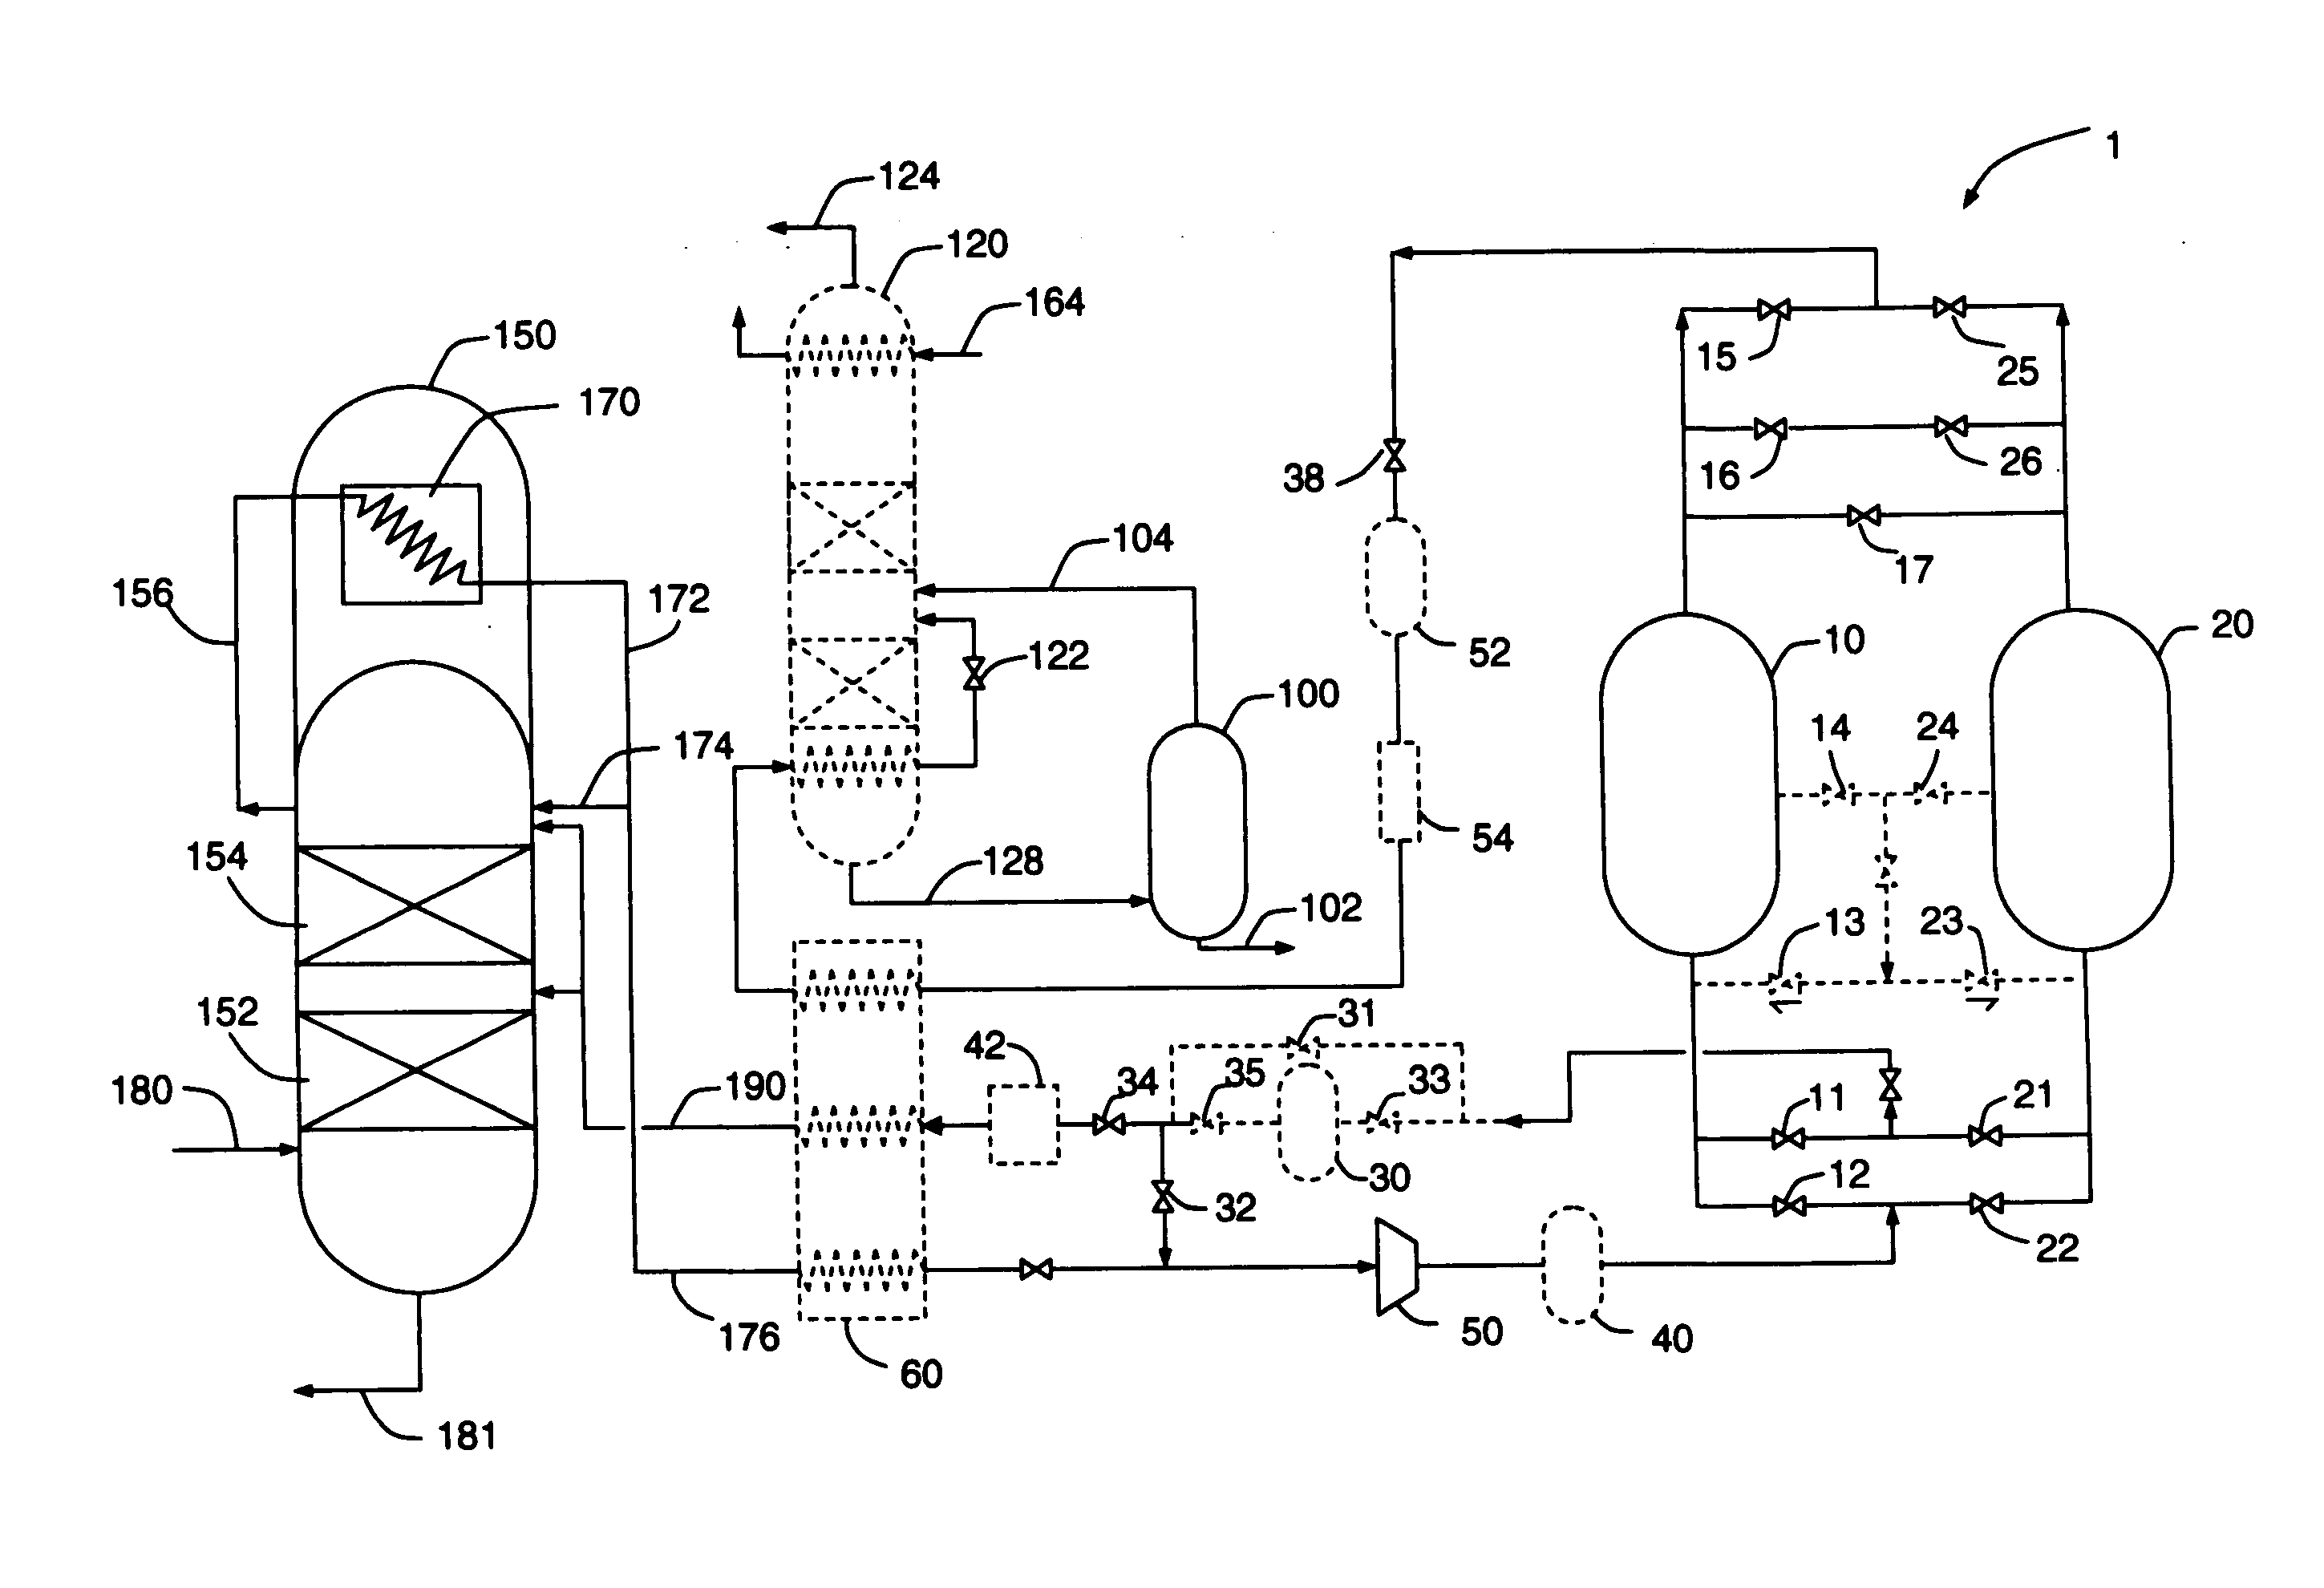 Combined cryogenic distillation and PSA for argon production